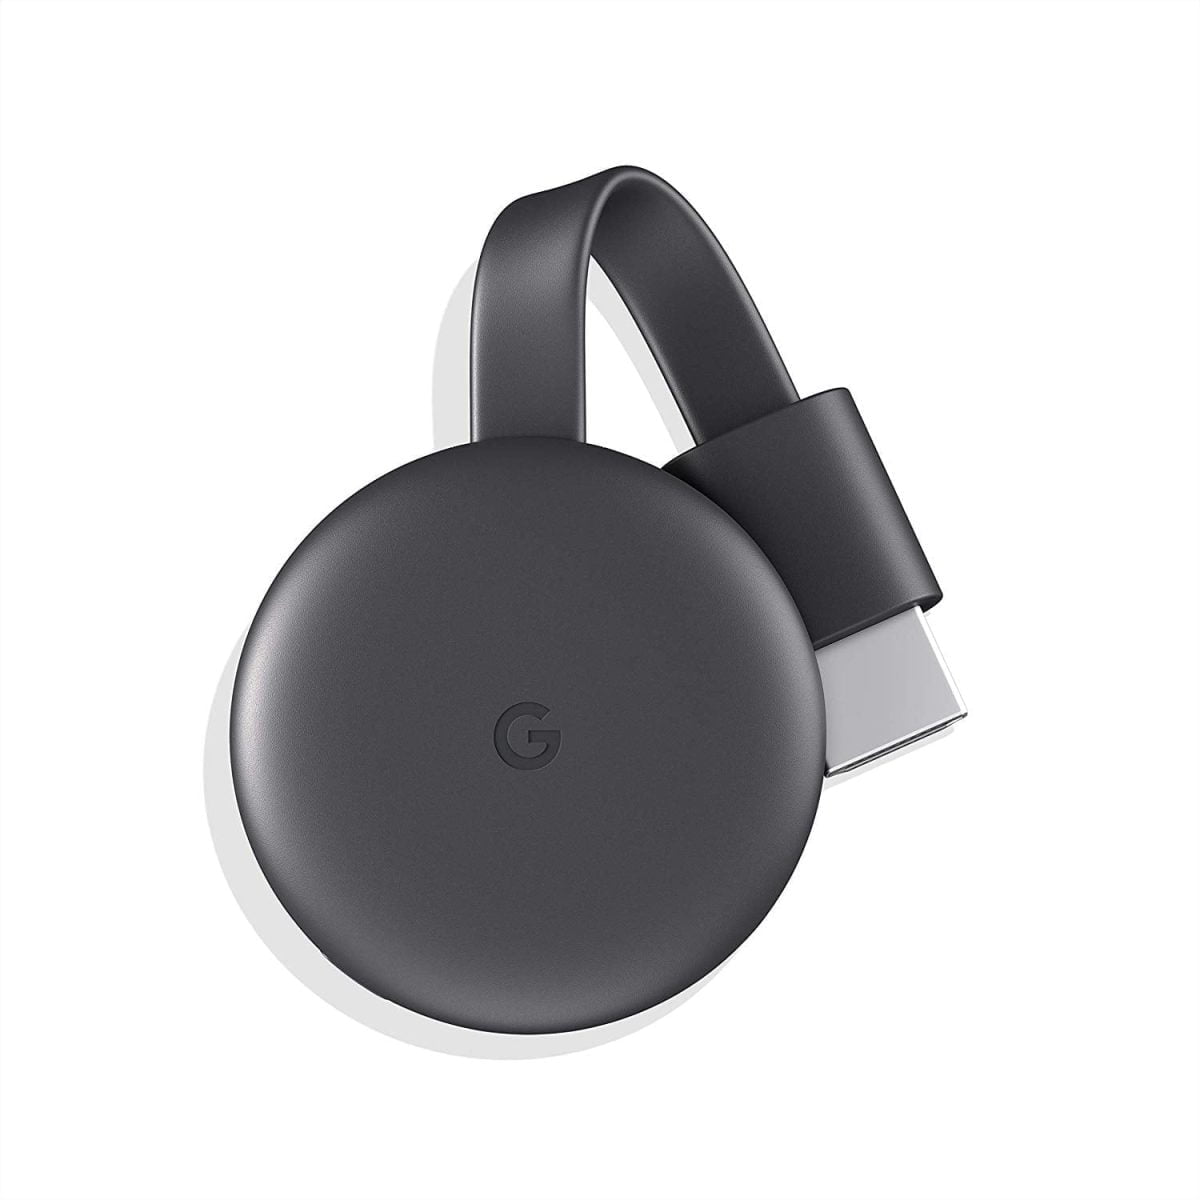 Google Chromecast 3Rd Gneration Media Streamer Google &Amp;Lt;Div Class=&Amp;Quot;Jsx-115903991 Jsx-3349621030&Amp;Quot;&Amp;Gt; &Amp;Lt;Div Class=&Amp;Quot;Jsx-1889249662 Overviewsection&Amp;Quot;&Amp;Gt;Google Chromecast 3 Makes Your Tv Smarter! You Can Now Stream Entertainment Directly From Your Phone And Other Devices To Your Tv. Use Your Phone Or Device To Stream Tv Shows, Movies, Games And More From 800+ Plus Compatible Apps, Including Youtube, Netflix, Hotstar, Sonyliv, Gaana Etc. With 15% Higher Hardware Speed, The New Chromecast Supports 1080P And Is Google Assistant-Enabled. Chromecast Plugs Into Your Tv'S Hdmi Port And Works With Iphone, Ipad, Android Phone And Tablet, Mac And Windows Laptop And Chromebook. During Streaming, Your Device Is Free To Be Used For Calls, Messages Without Interrupting The Tv Screen. You Can Control The Playback From Any Part Of The Wifi-Enabled House. No Additional Remote(S) Required.&Amp;Lt;/Div&Amp;Gt; &Amp;Lt;/Div&Amp;Gt; &Amp;Nbsp; Google Chromecast 3Rd Gneration Media Streamer